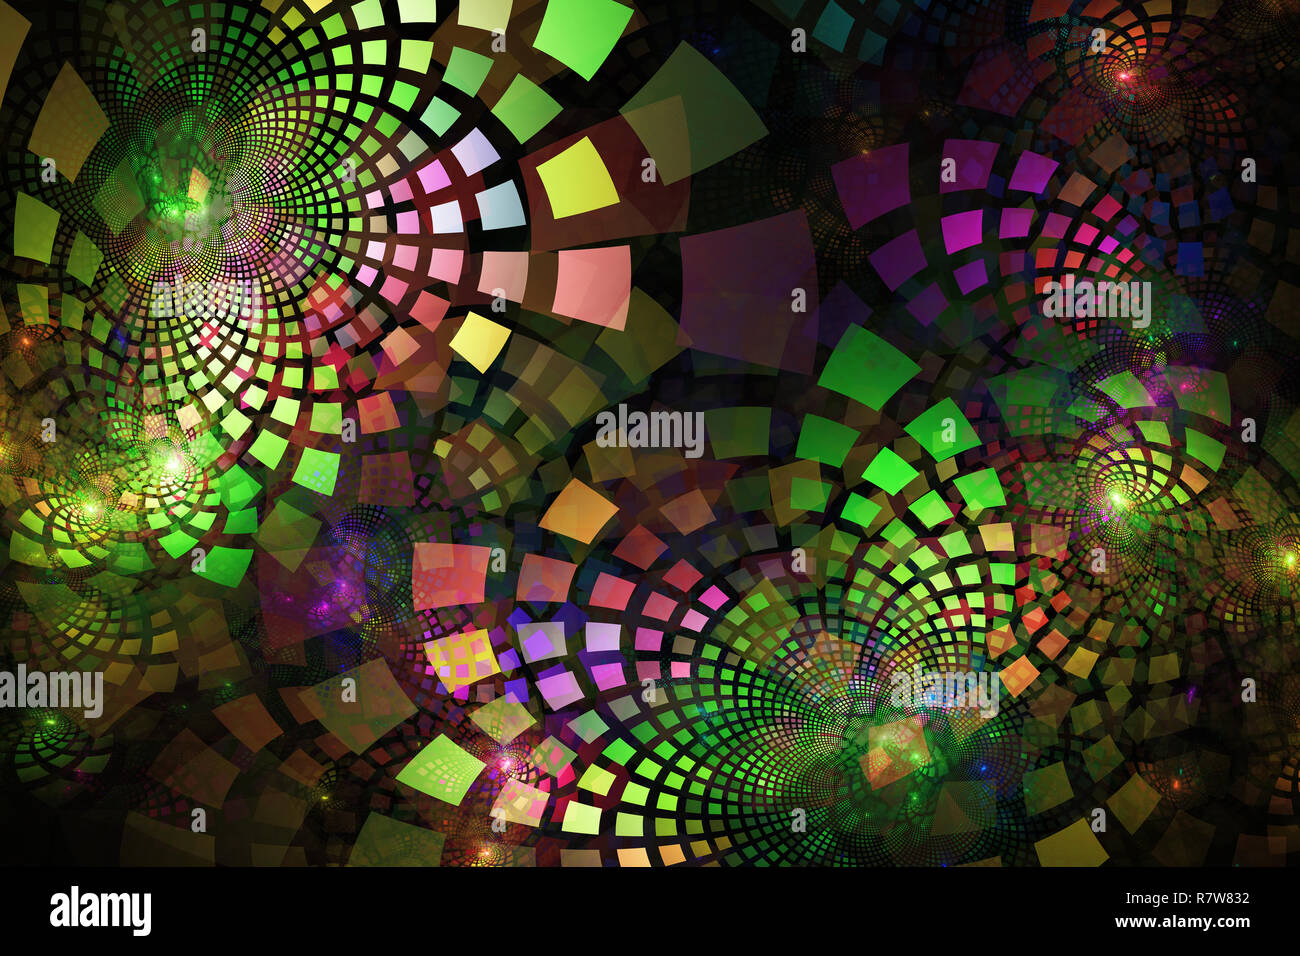 Fractal tiles in neon colors curving out in groups and layers, on dark background Stock Photo